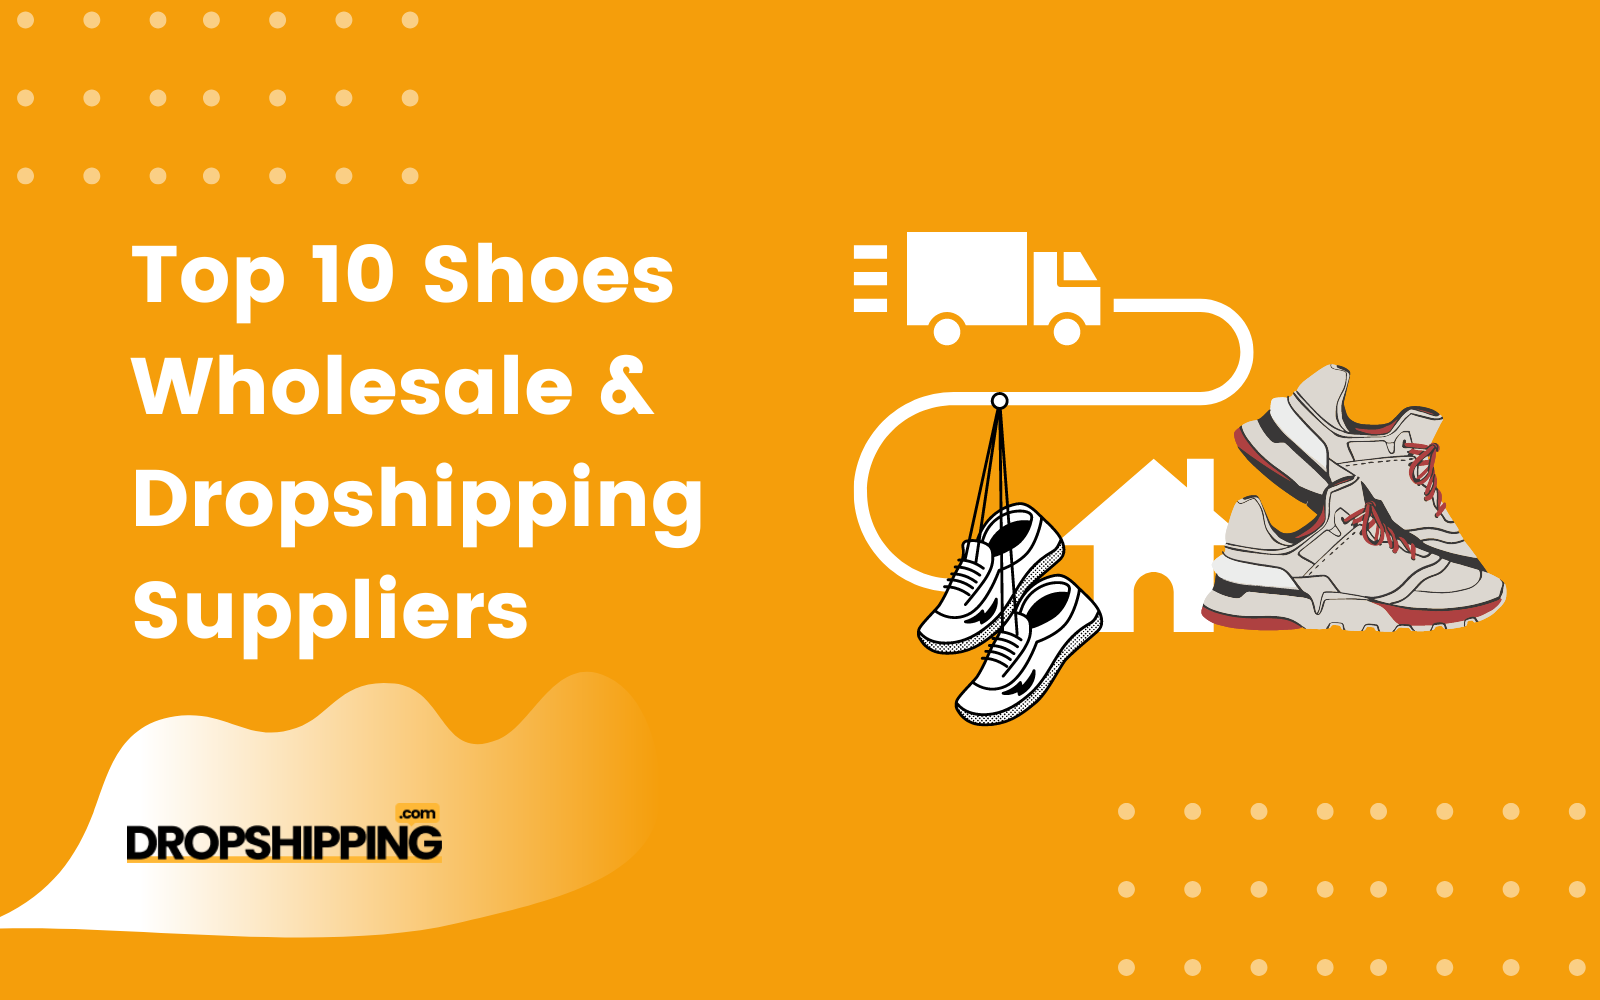 Dropshipping Shoes: Top 10 Shoes Wholesale & Dropshipping Suppliers